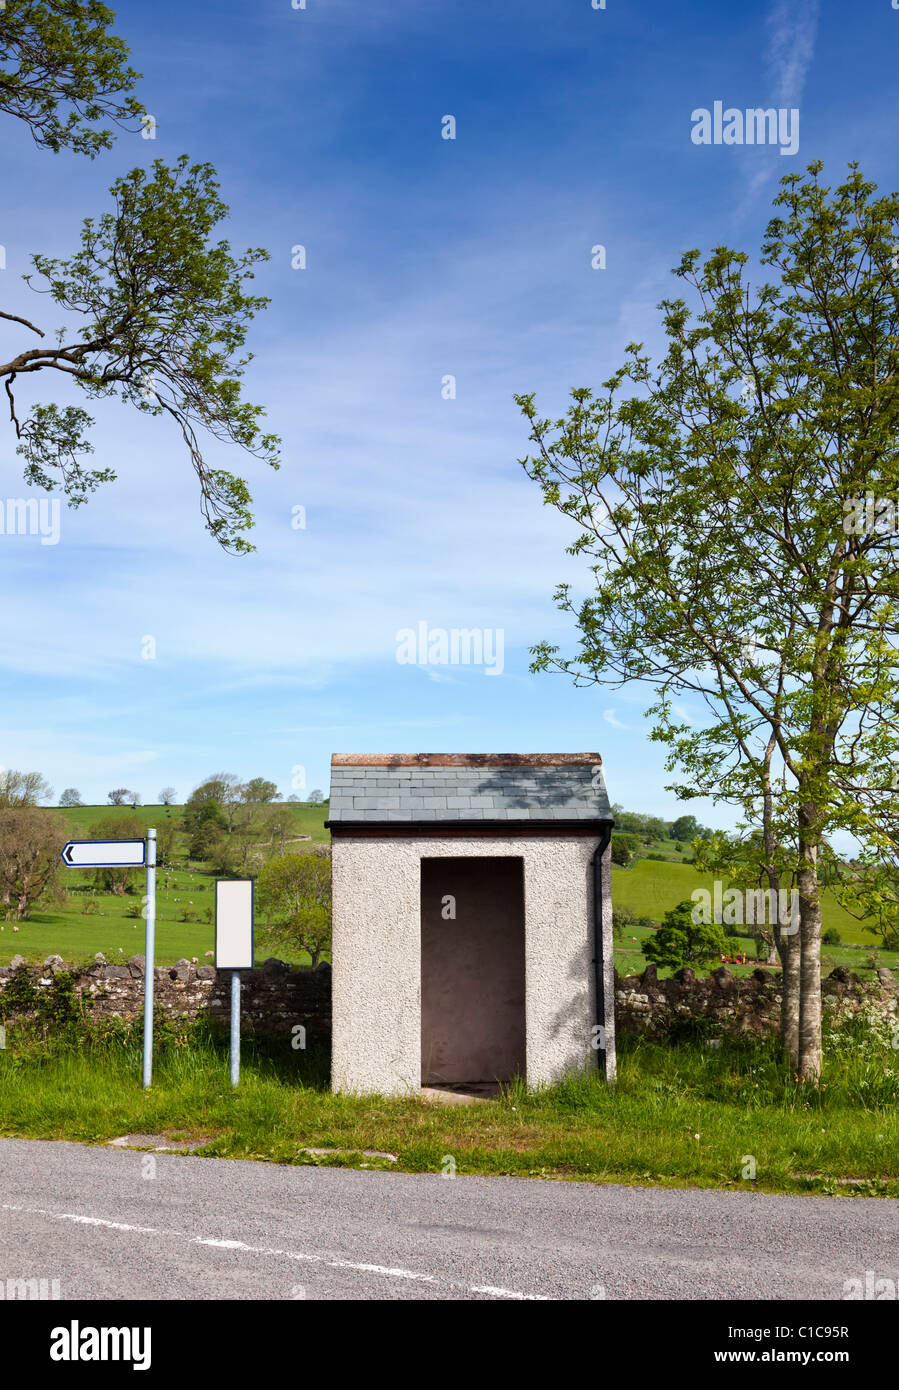 Small rural countryside bus stop and shelter with blank signs, England UK Stock Photo